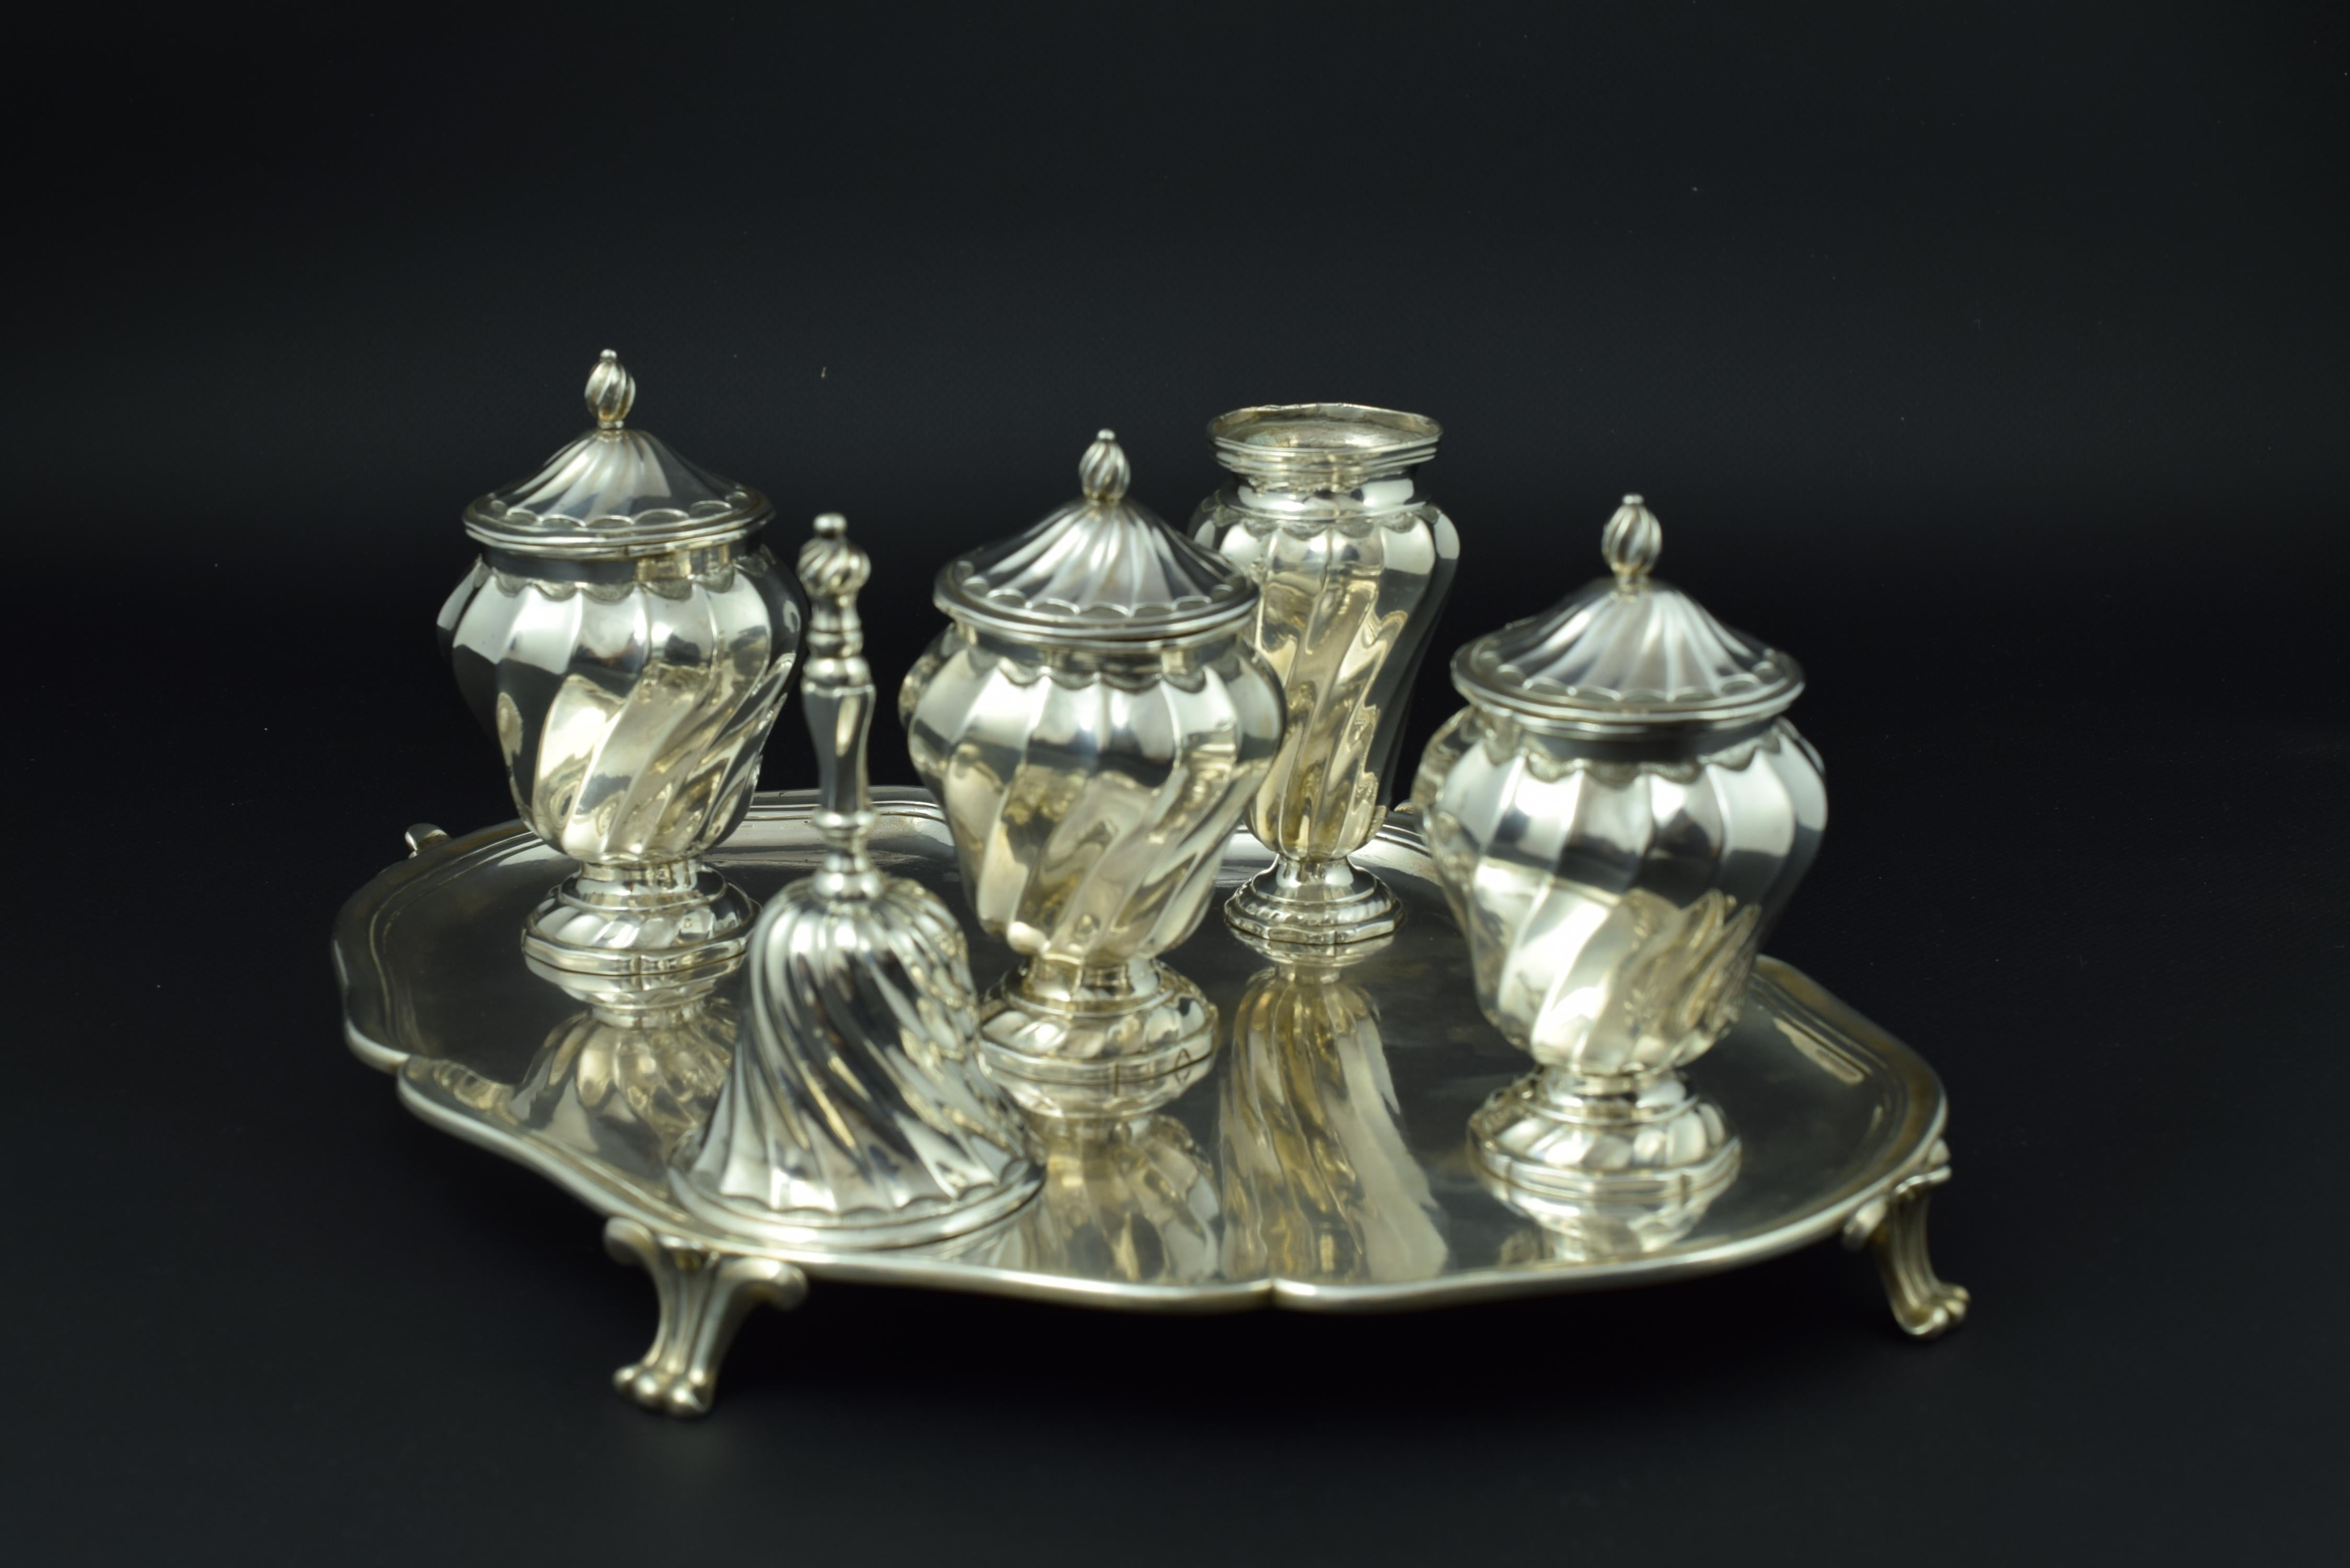 With hallmarks and property marks (AL).
A tray of curved profiles is supported on four legs in the shape of plant elements. Fixed to it are four elements. These, and the bell, present a magnificent decoration based on flat gallons (shell shapes)